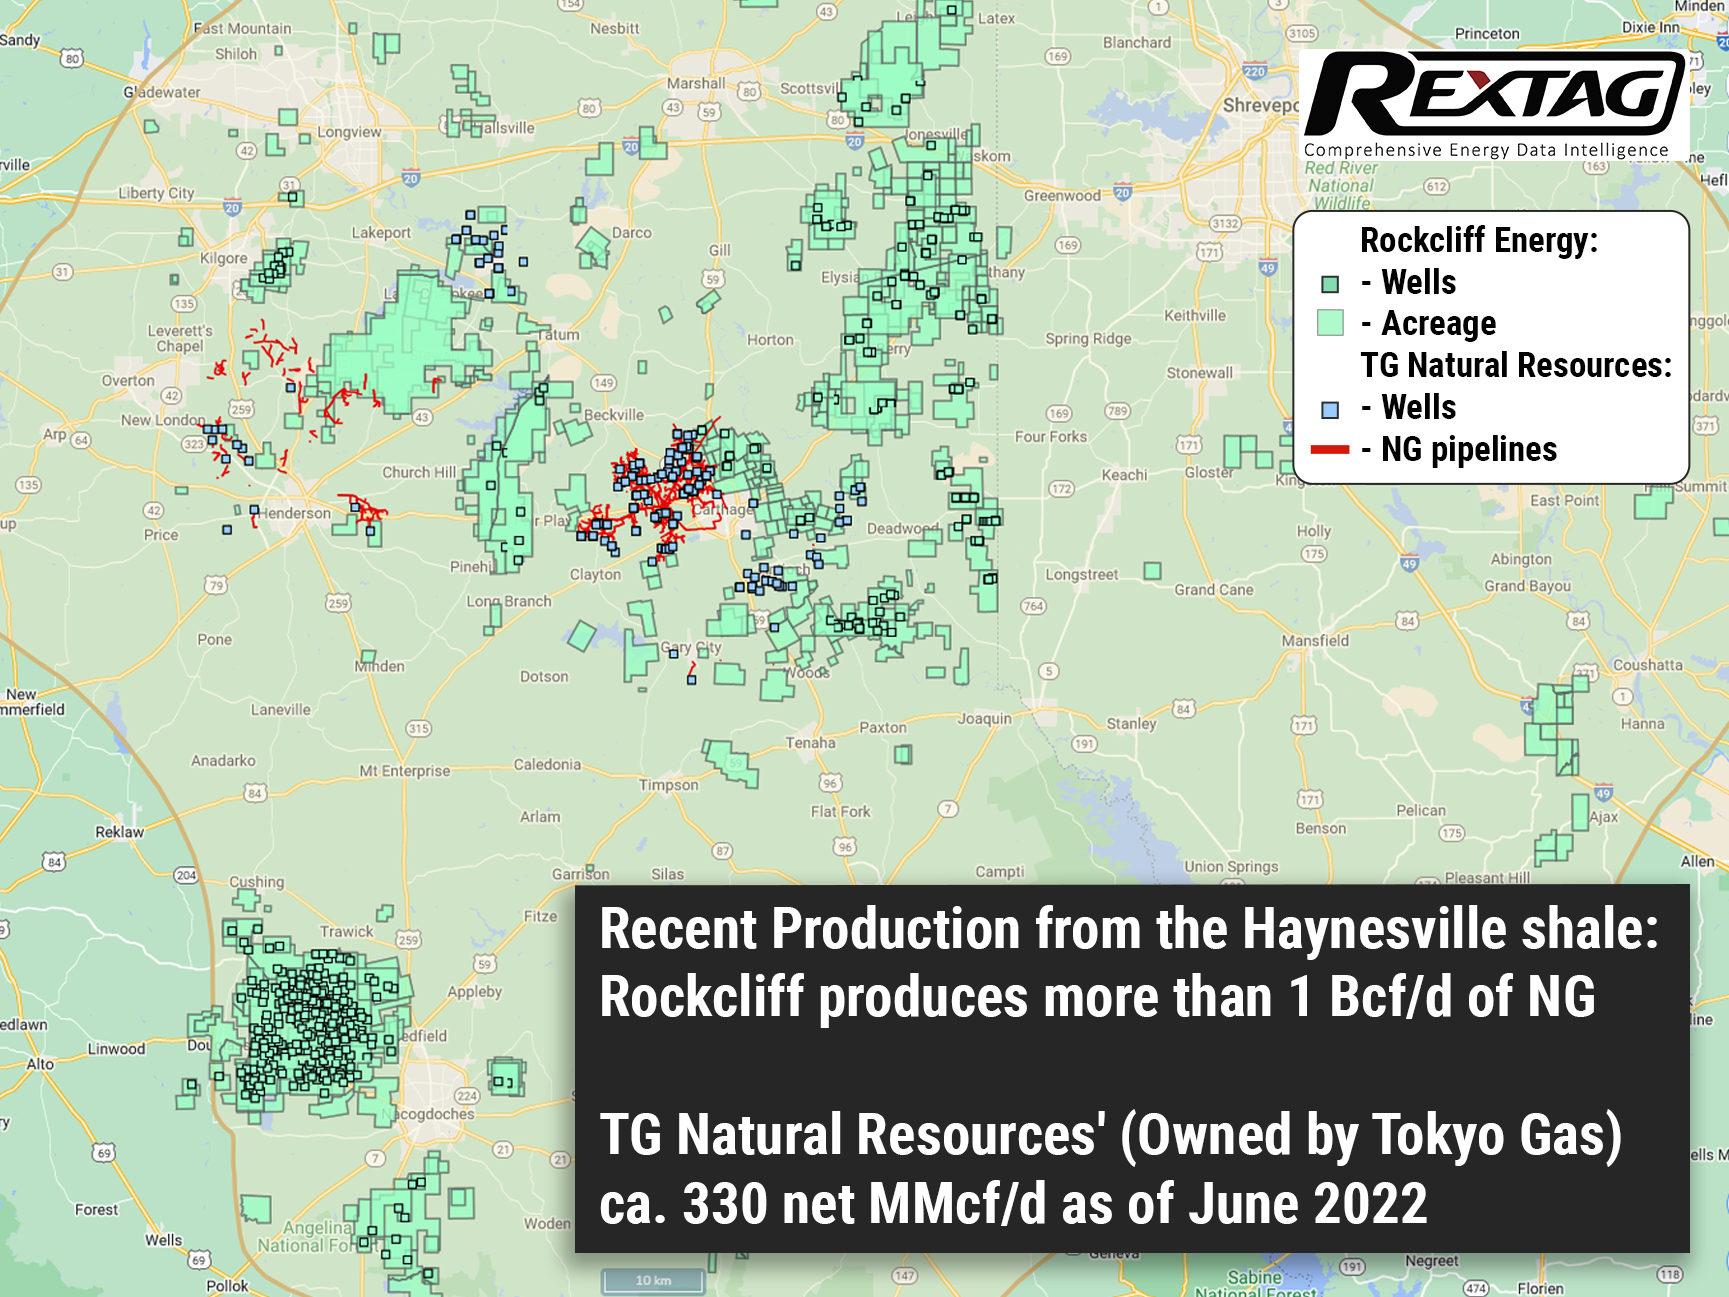 Tokyo-Gas-s-Set-to-Buy-Rockcliff-Energy-One-of-the-Top-Haynesville-s-Producers